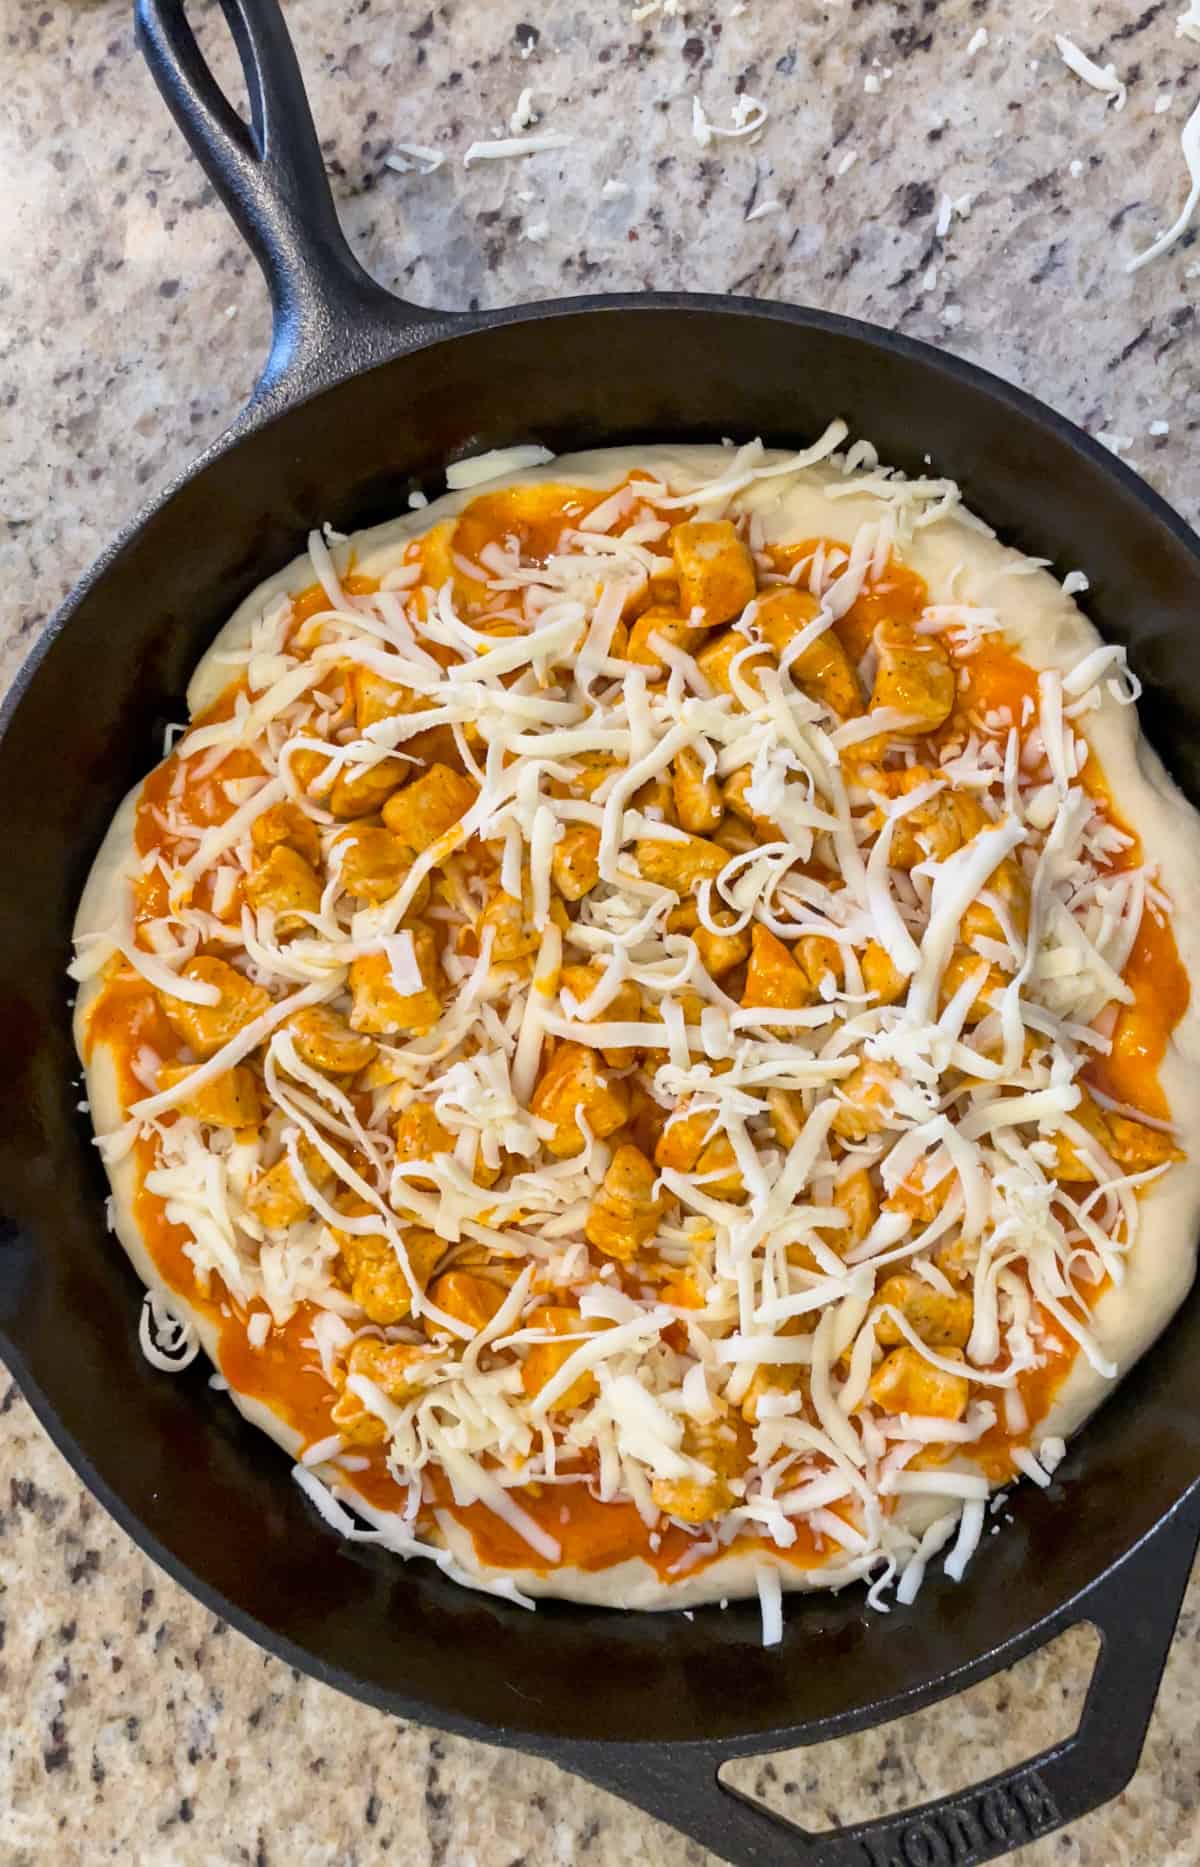 Buffalo chicken pizza assembled in a cast iron pan and ready for the oven.